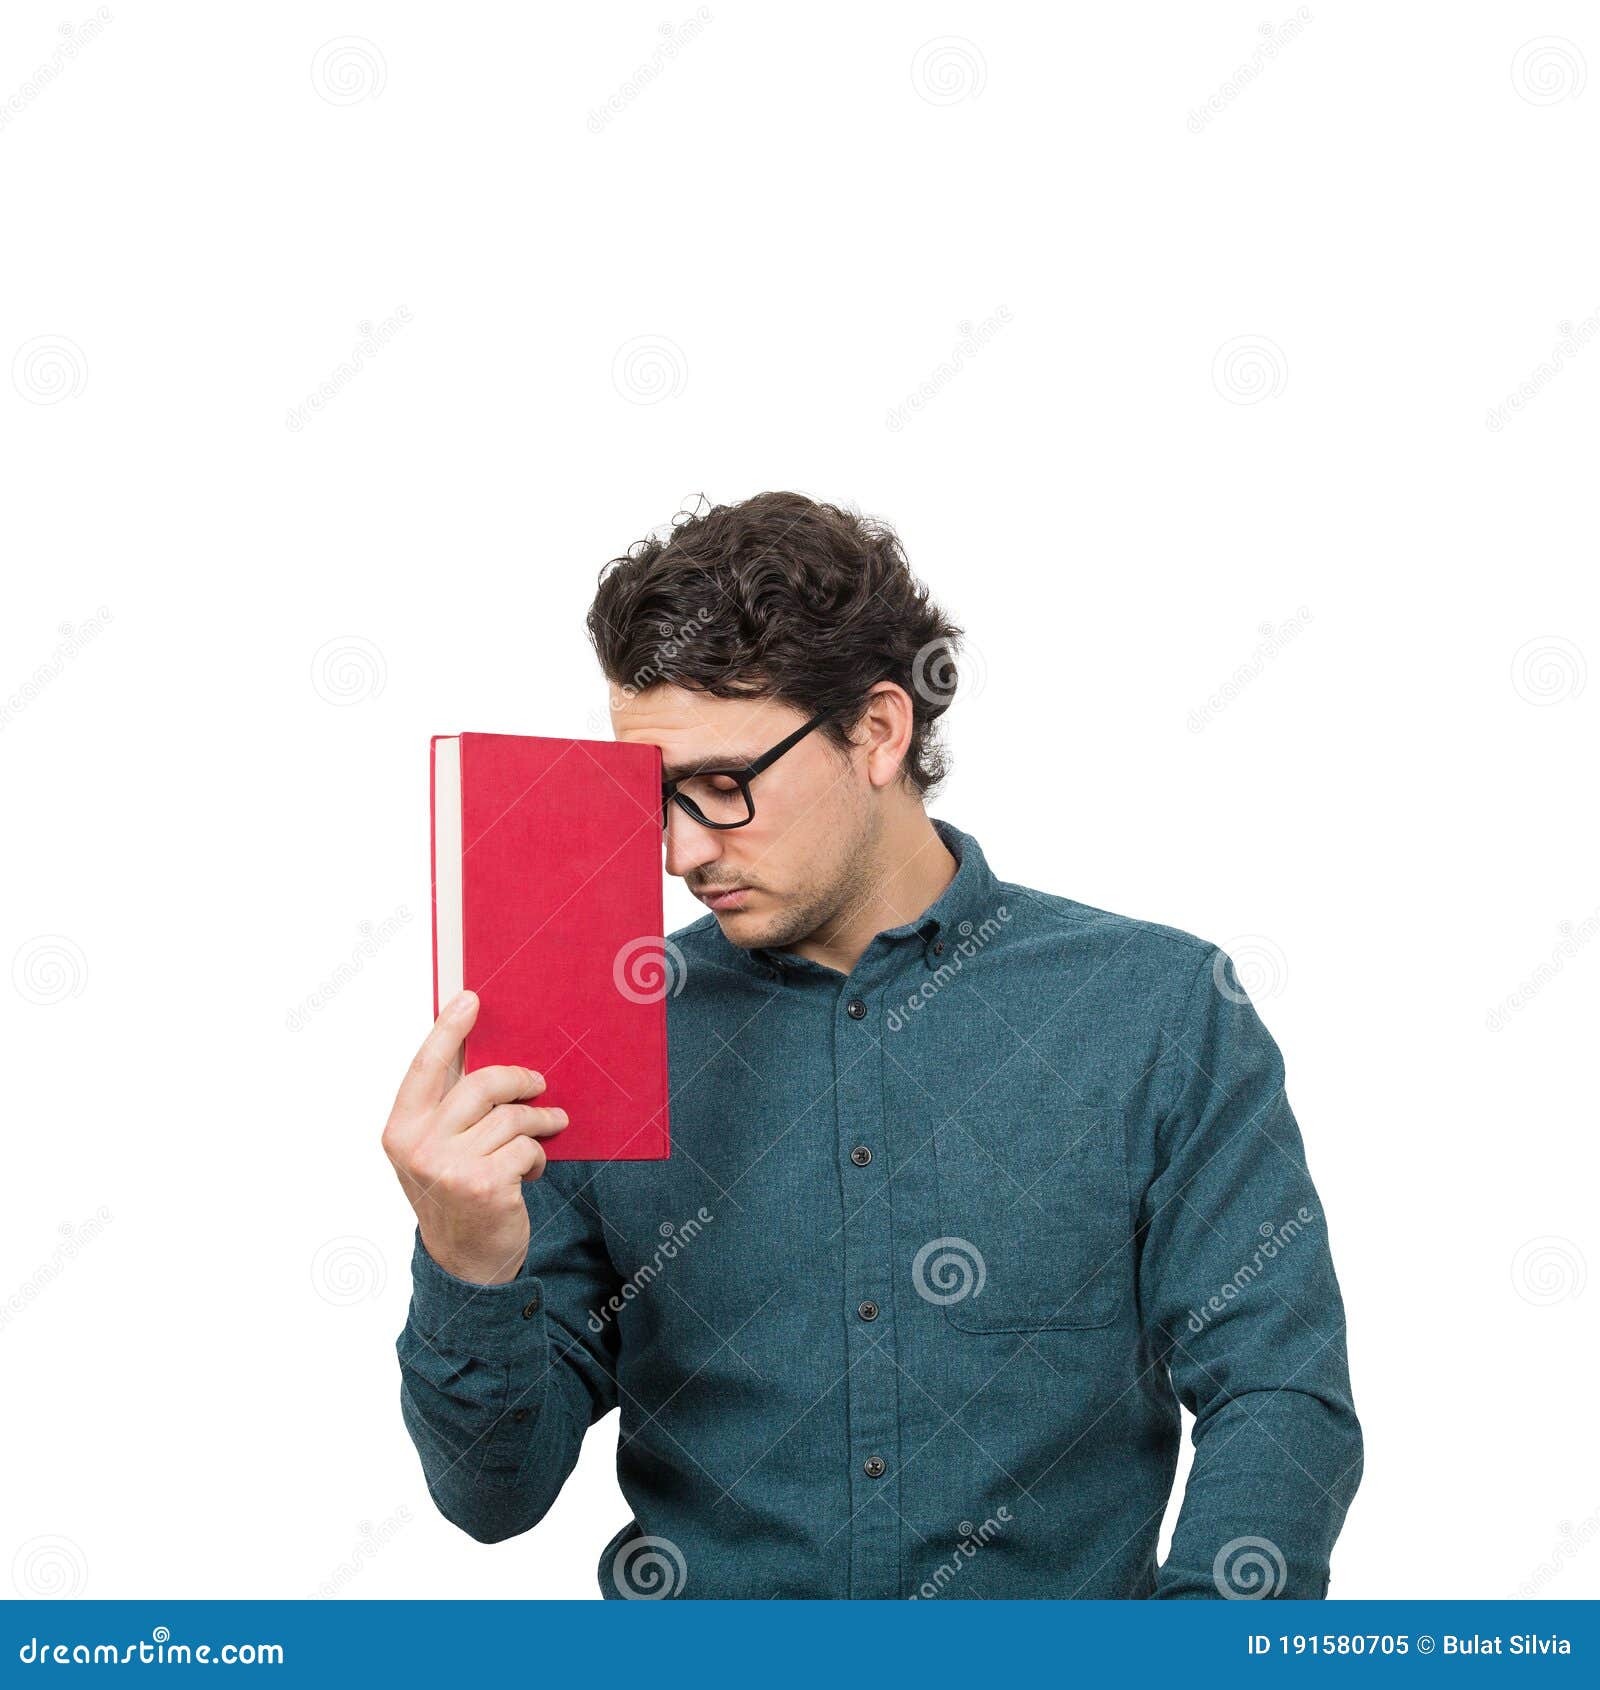 tired student guy looking down with pessimistic emotion, holding a book,  on white background. confused young man has